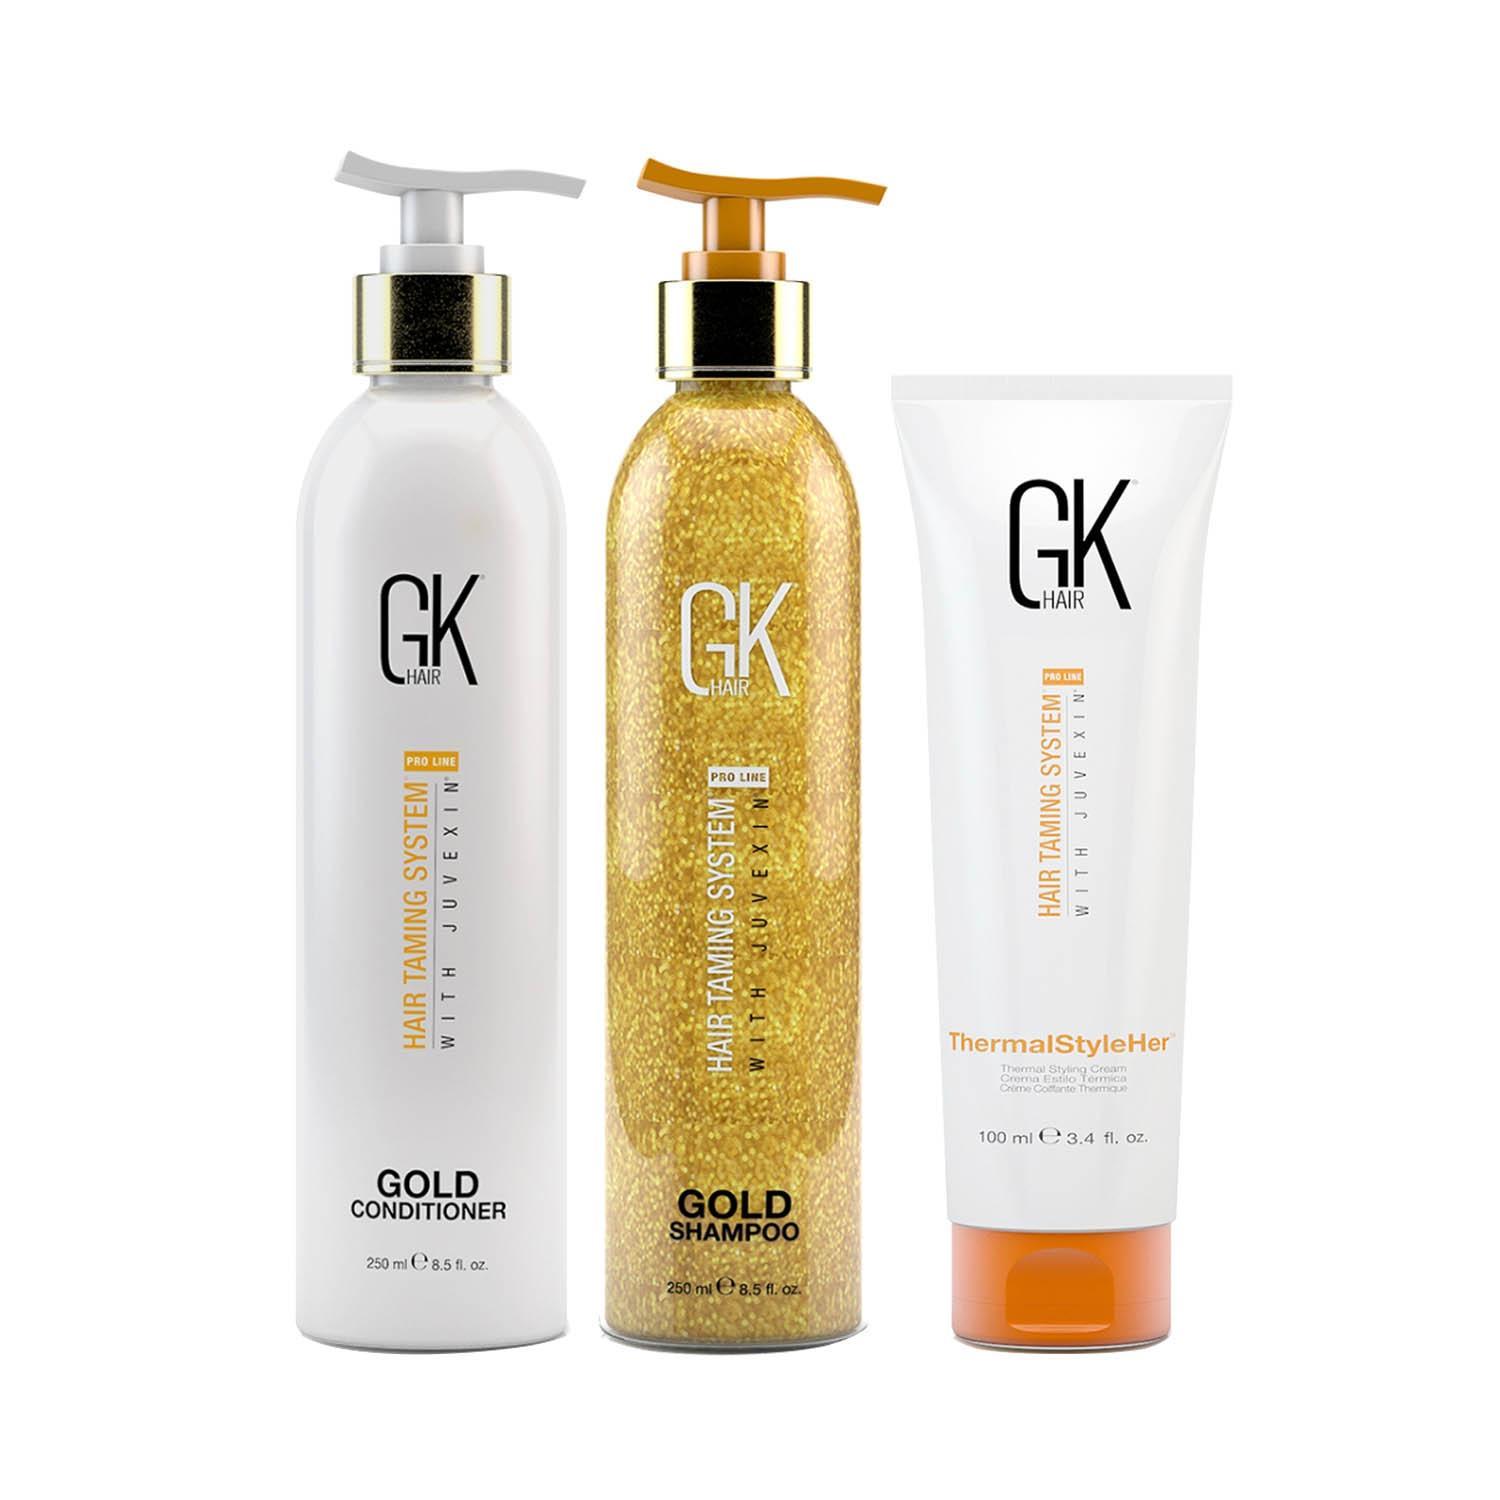 gk hair gold shampoo and conditioner 250ml with thermal styler cream 100ml